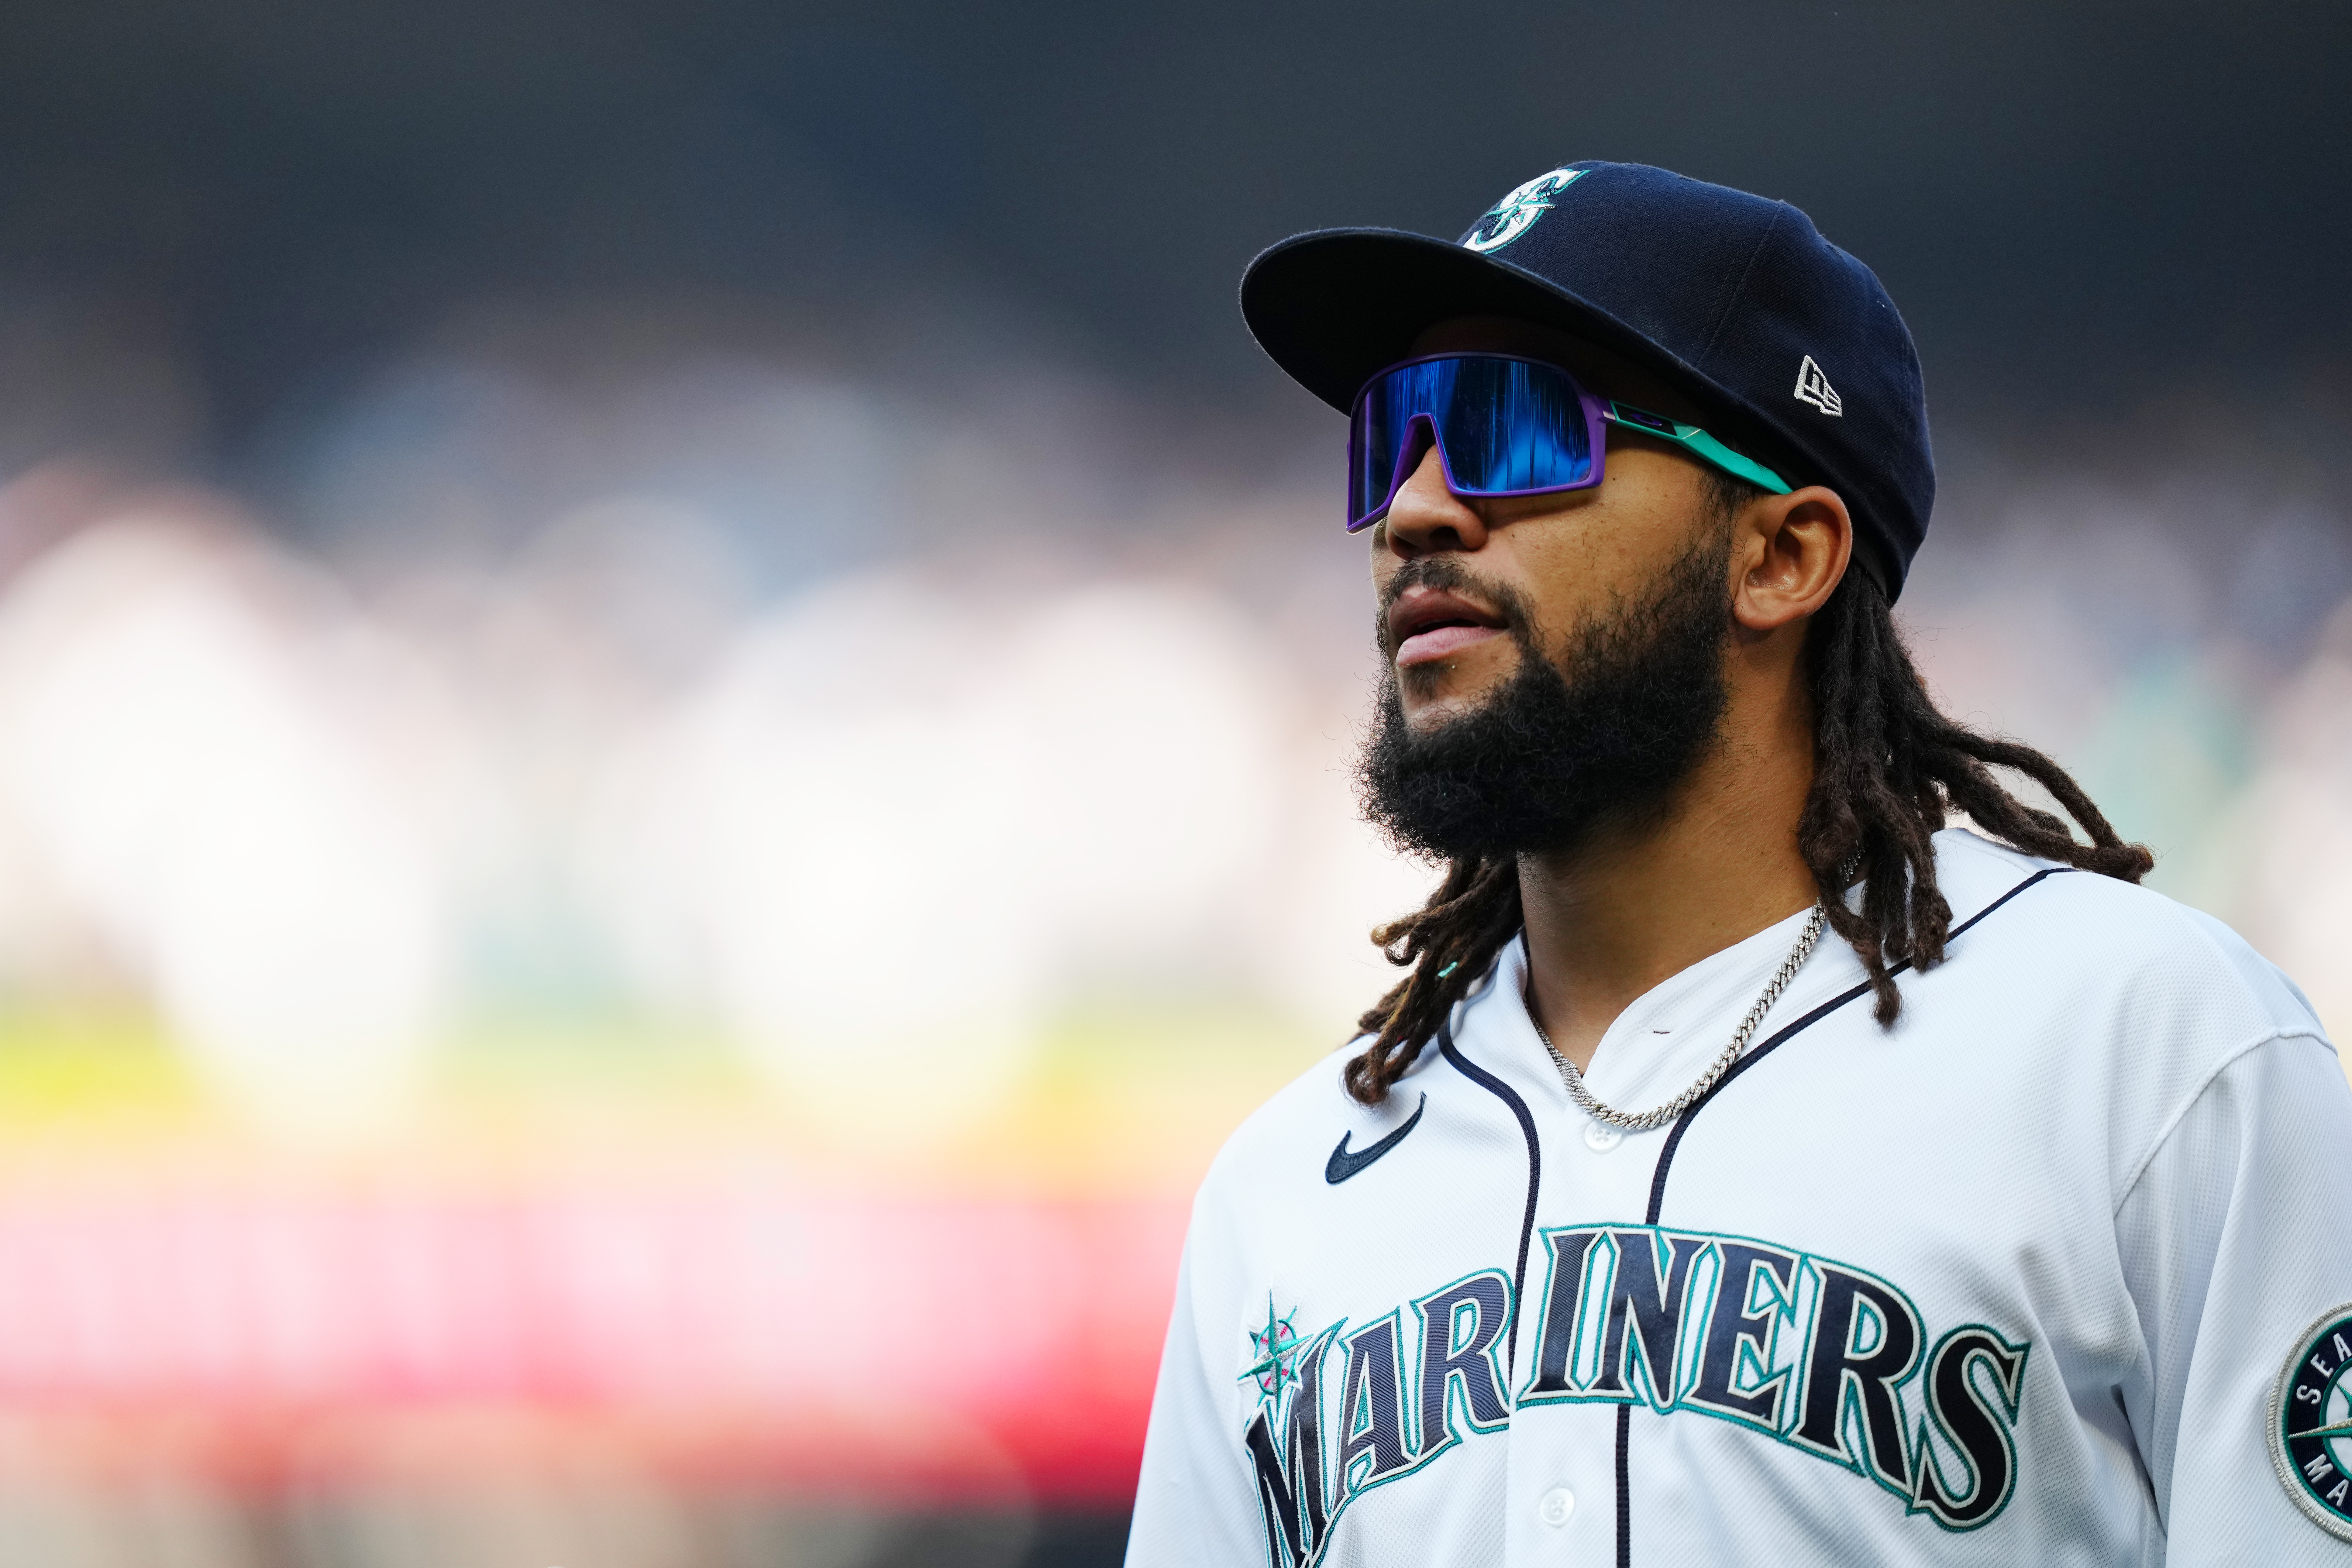 Mariners shortstop J.P. Crawford progressing quickly in his